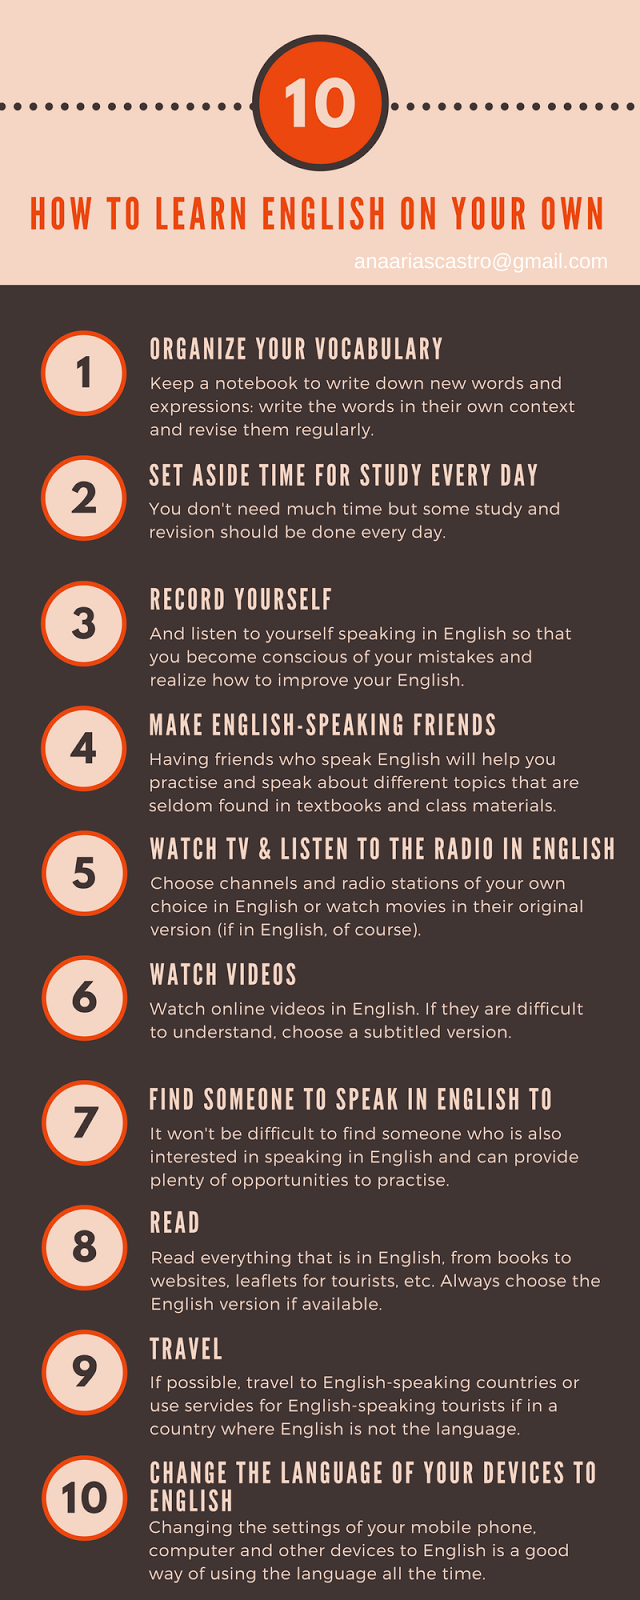 Cpi Tino Grandío Bilingual Sections How To Practise Your English